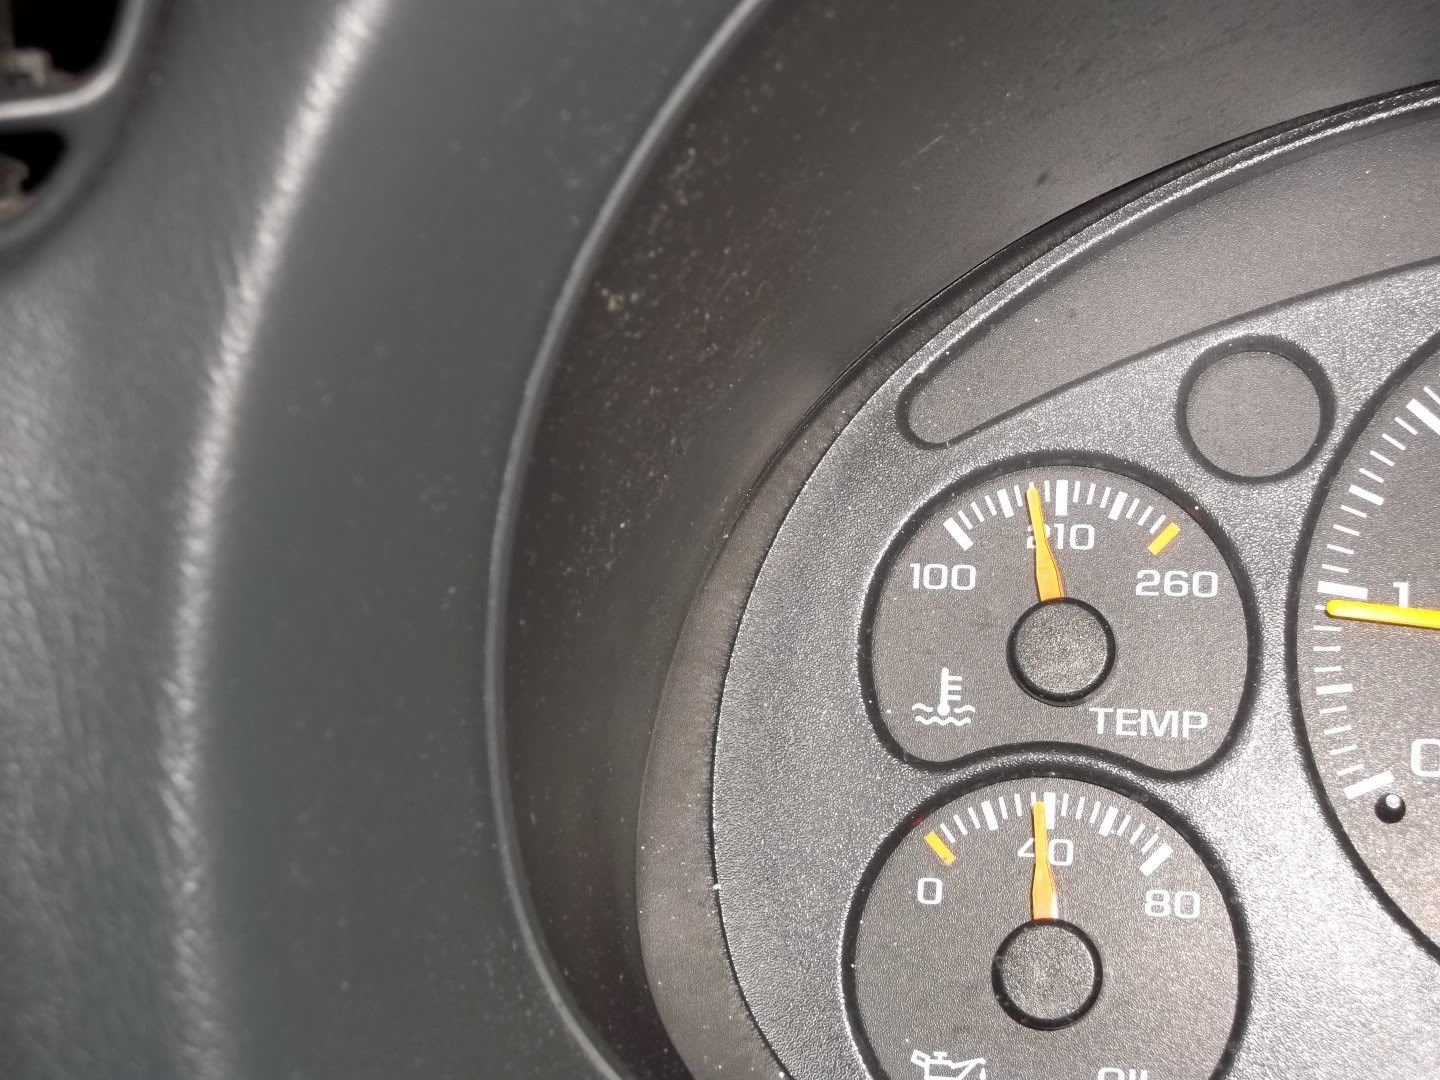 Honda temperature gauge goes up and down #2